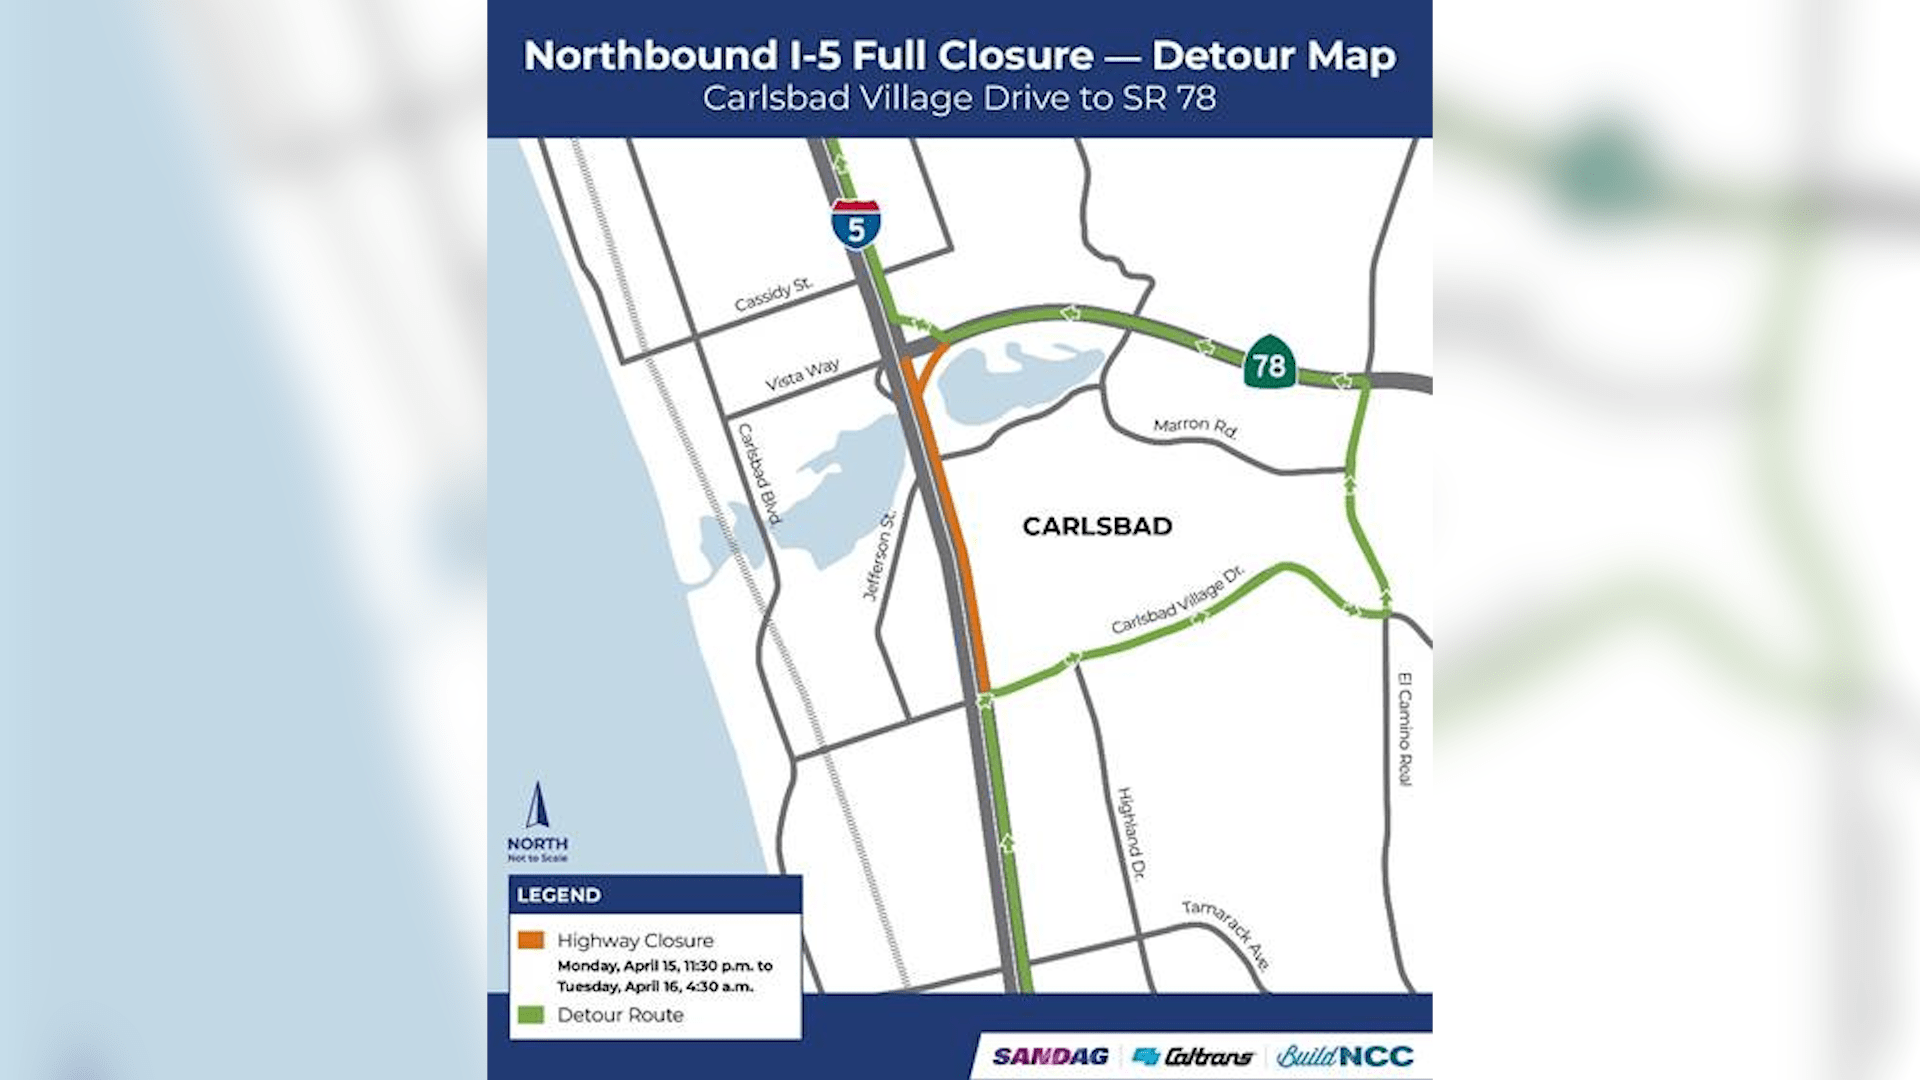 A northbound I-5 closure detour map provided by Caltrans.